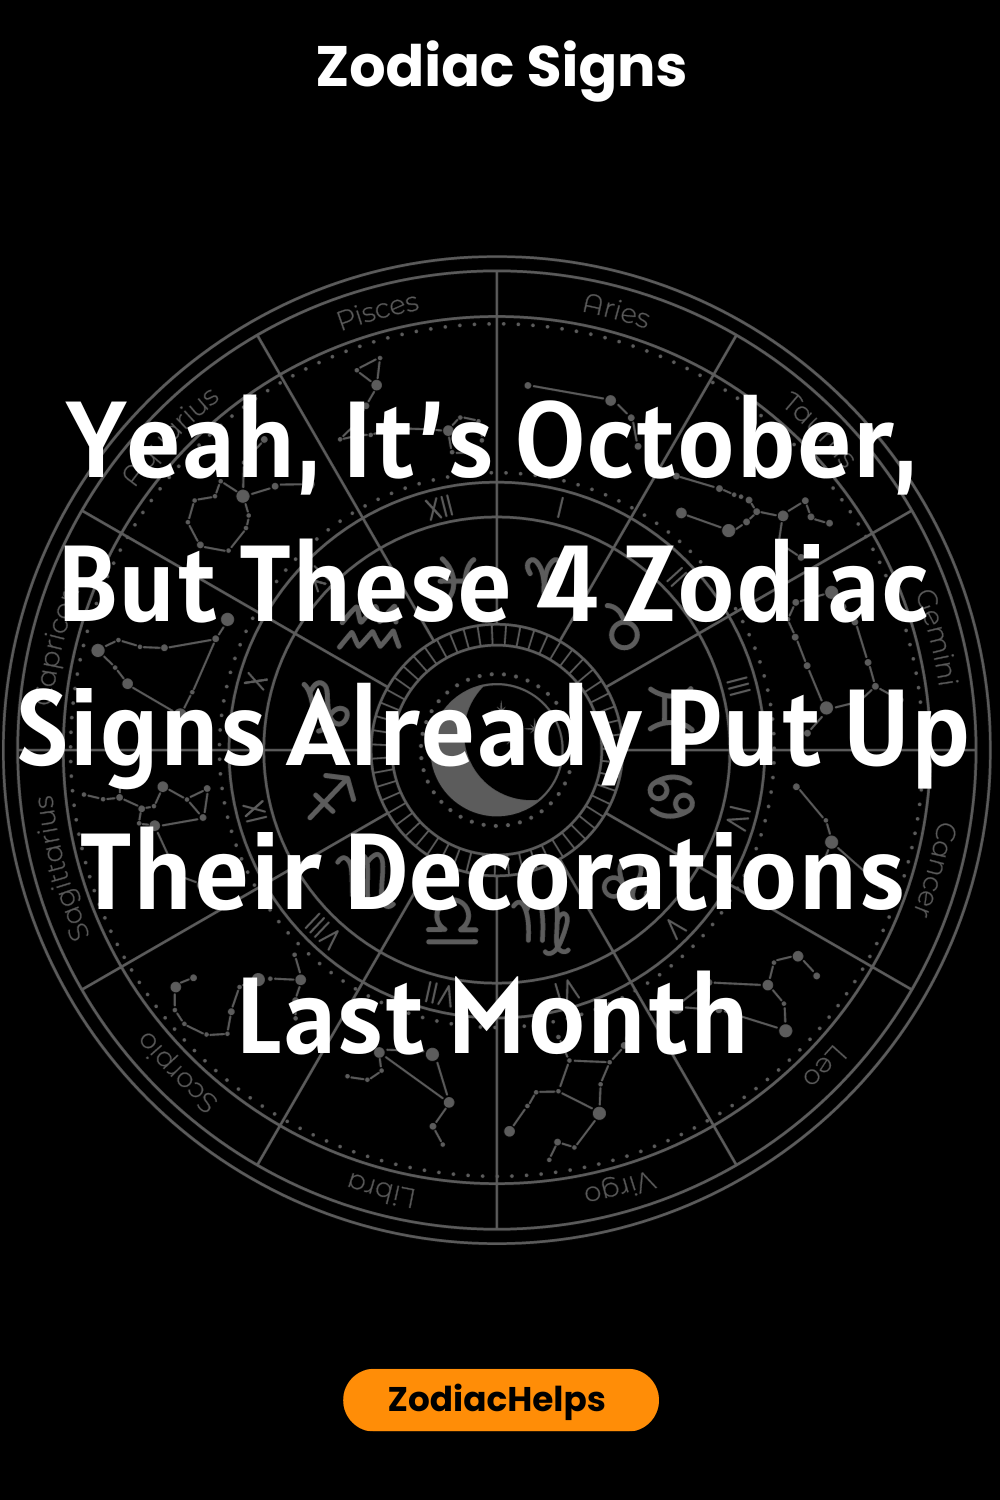 Yeah, It’s October, But These 4 Zodiac Signs Already Put Up Their Decorations Last Month